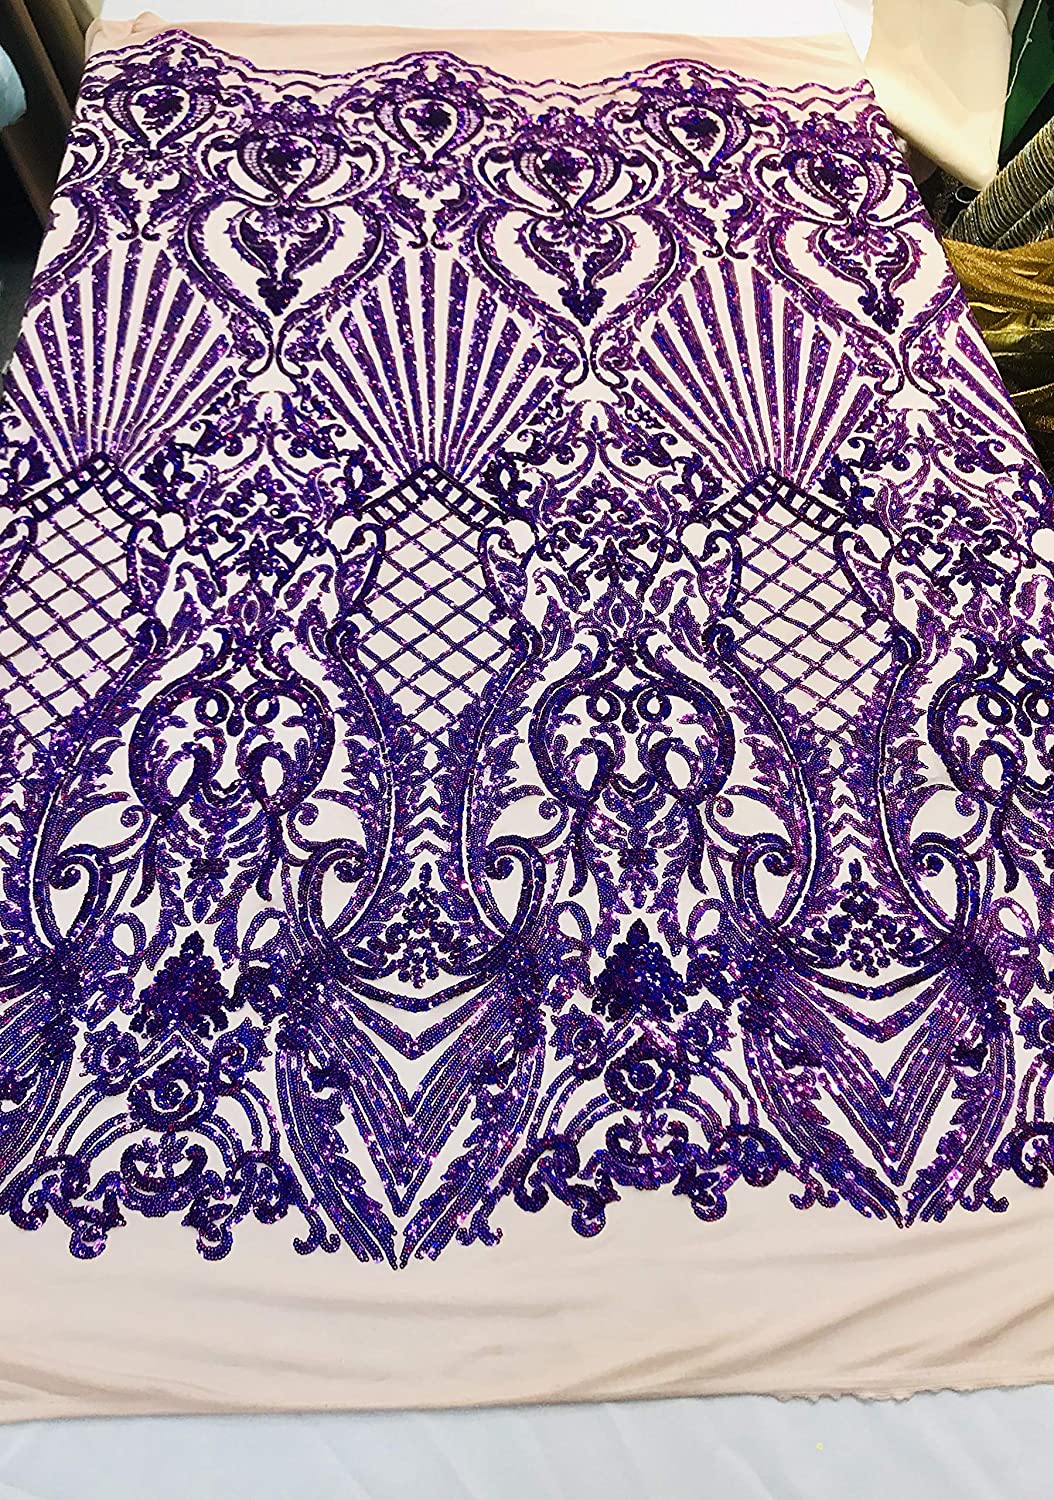 Damask Sequins Design on a 4 Way Stretch Mesh Fabric - for Night Gowns - Prom Dresses - (Purple on Nude, 1 Yard)